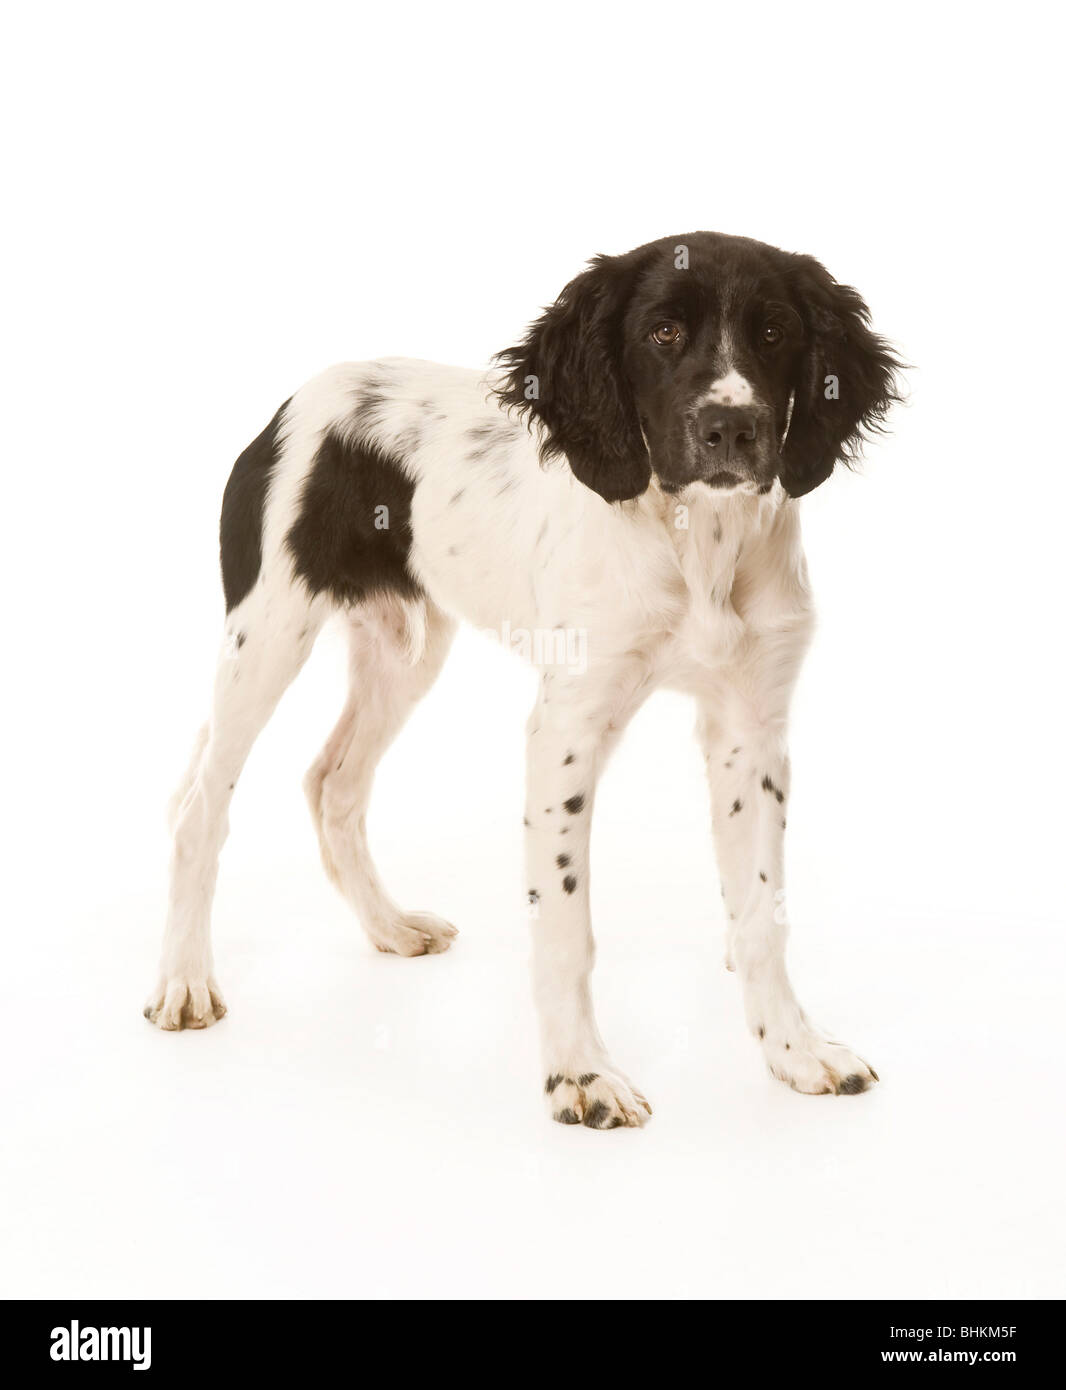 Black and white Large Munsterlander puppy standing on white background facing camera Stock Photo